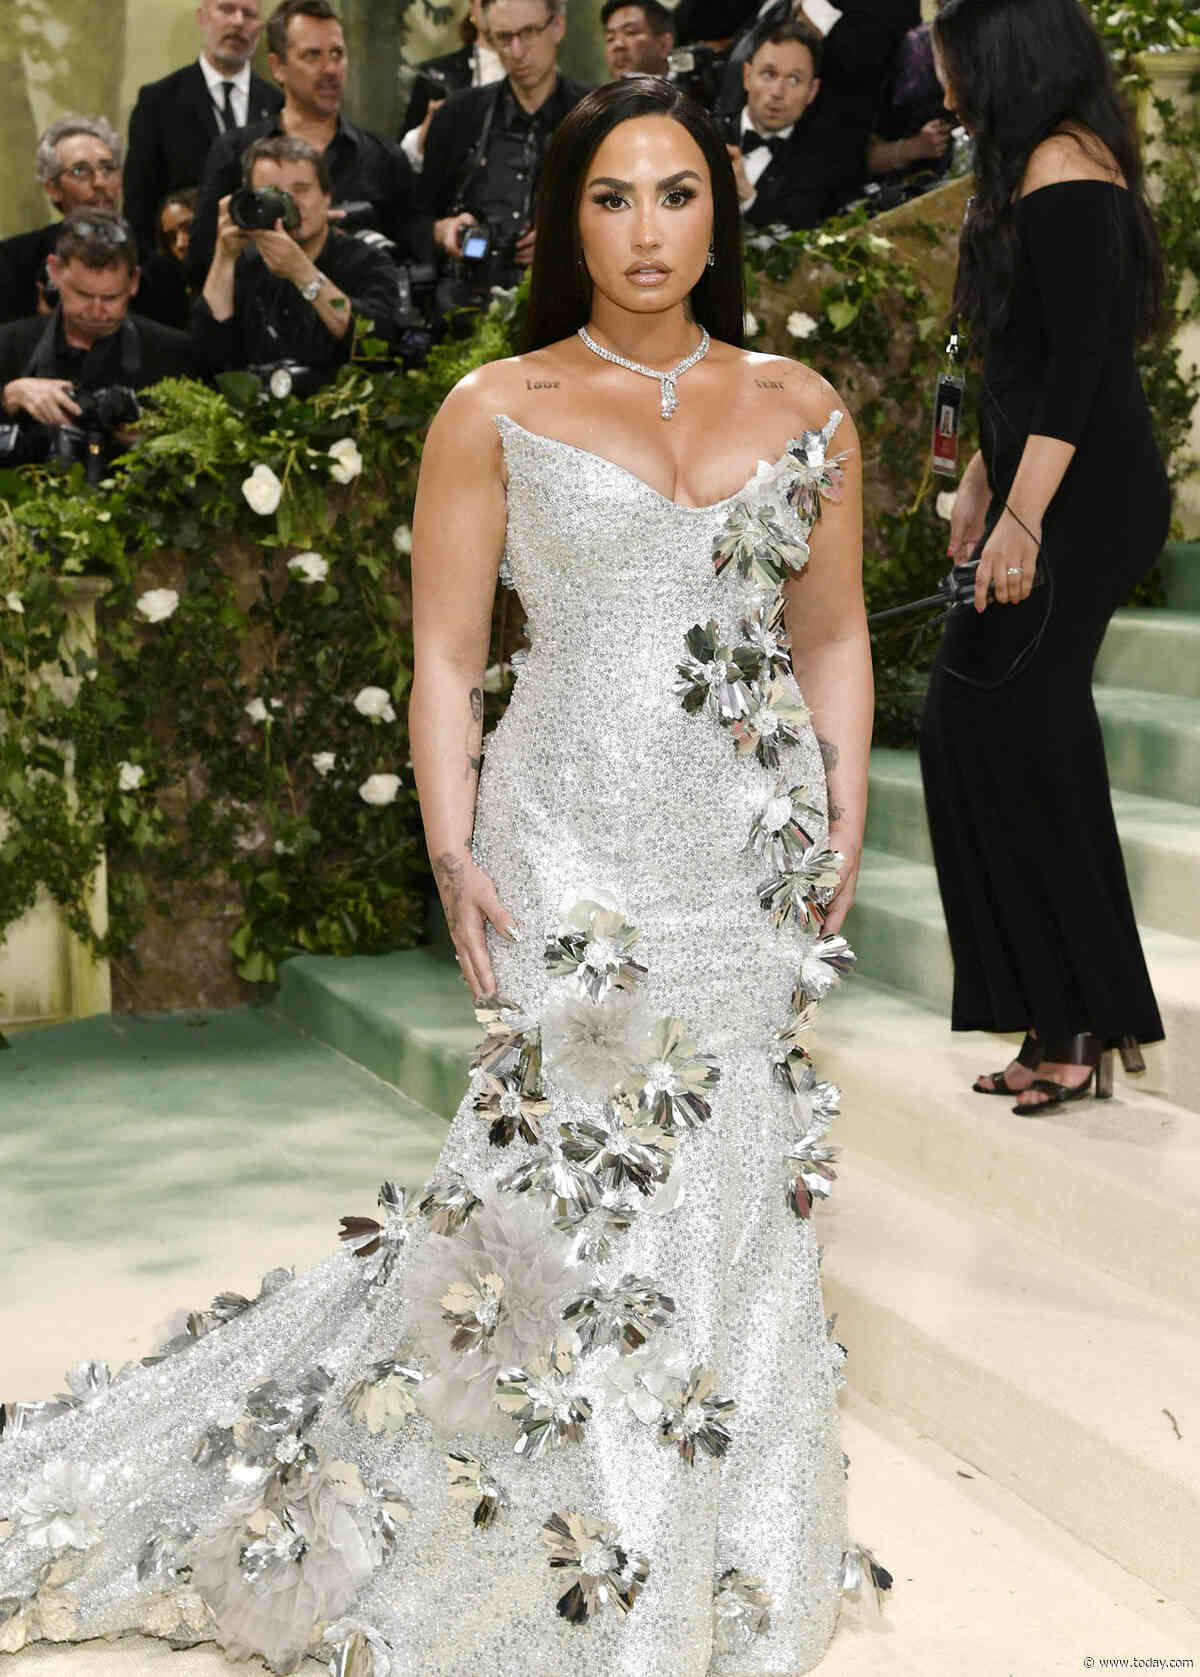 Demi Lovato attends her 1st Met Gala since calling it 'terrible' 6 years ago